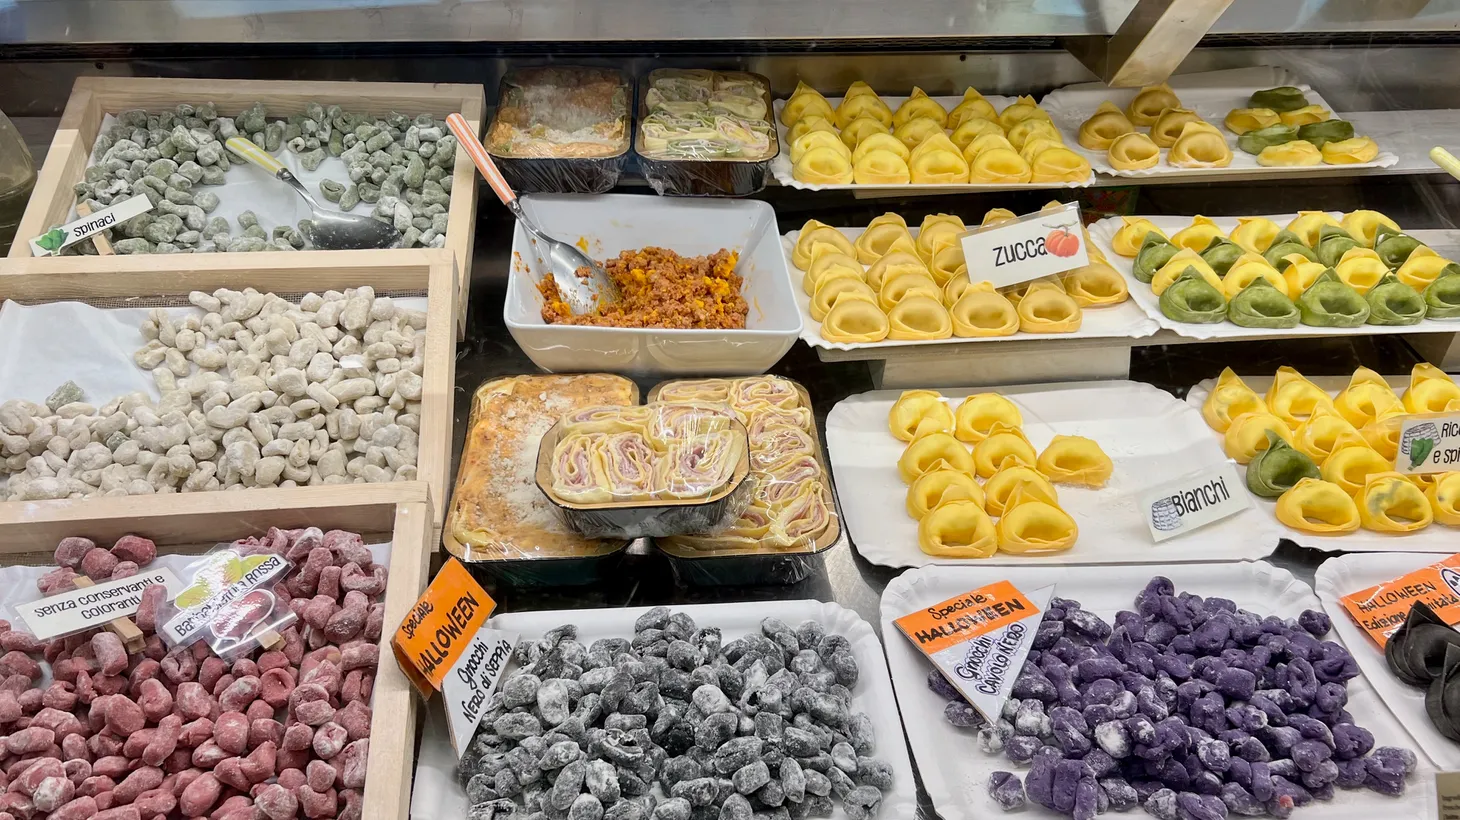 Here are a few of the many shapes and types of fresh pasta found in Modena.